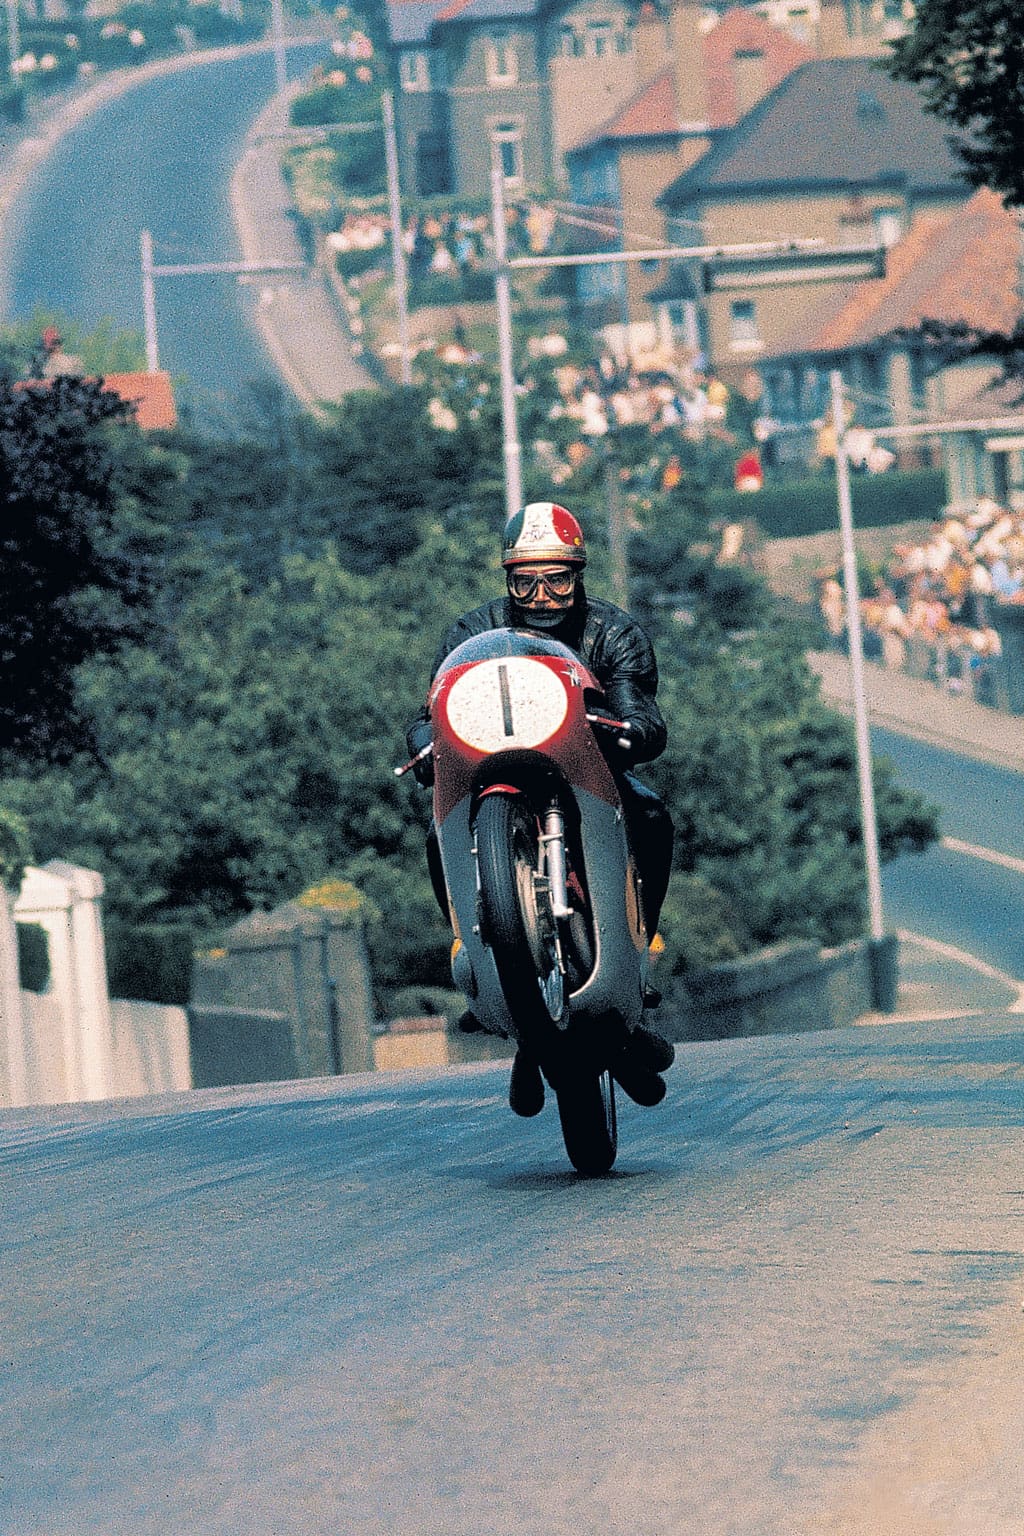 Surely one of the most iconic TT shots, captured by the camera of Nick Nicholls, Italian legend Giacomo Agostini crests the rise at the foot of bray Hill which was forever after know as Ago's Leap.